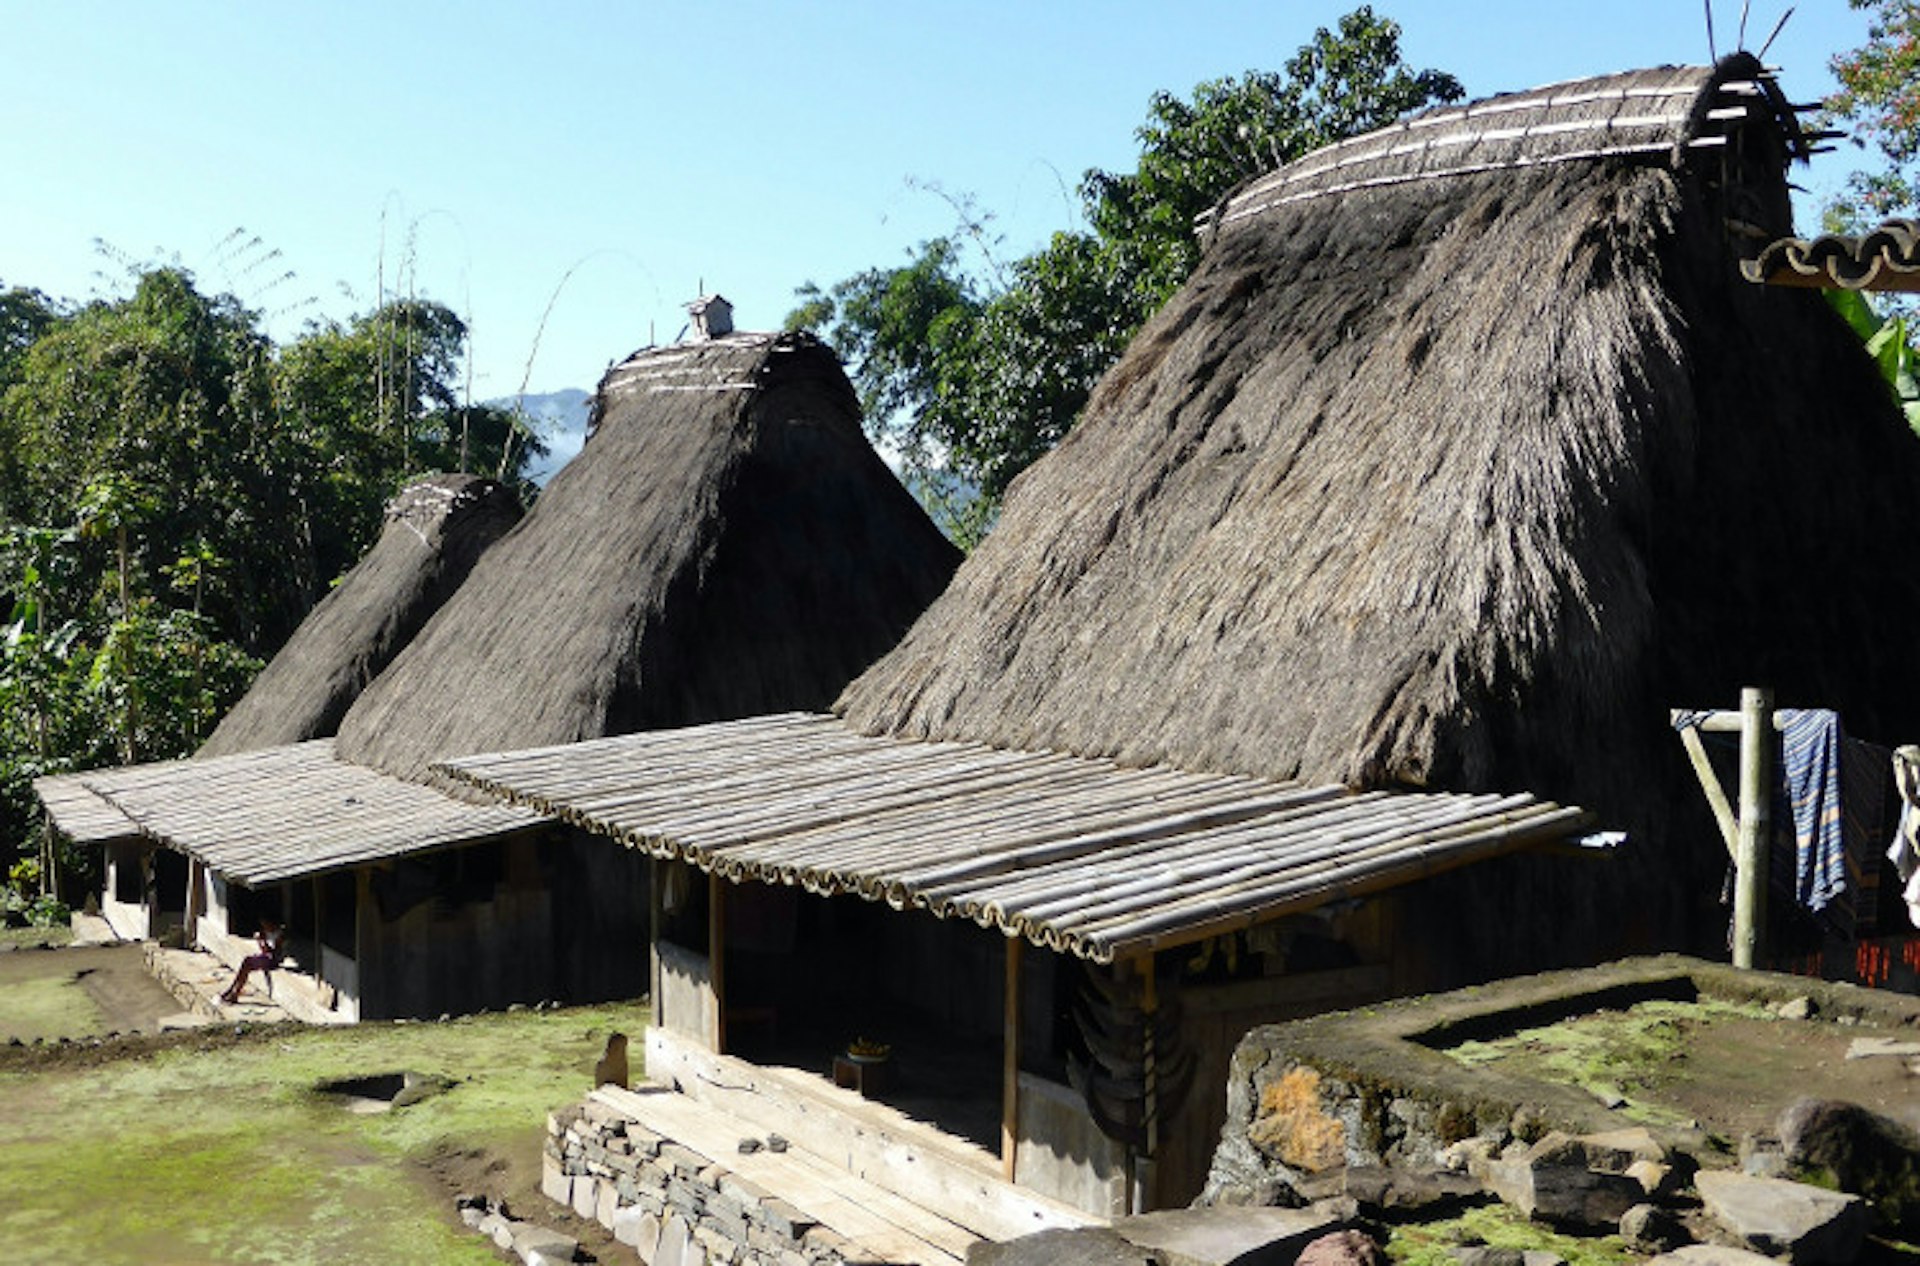 Traditional village, Flores. Image by Bryn Pinzgauer Flickr CC BY 2.0